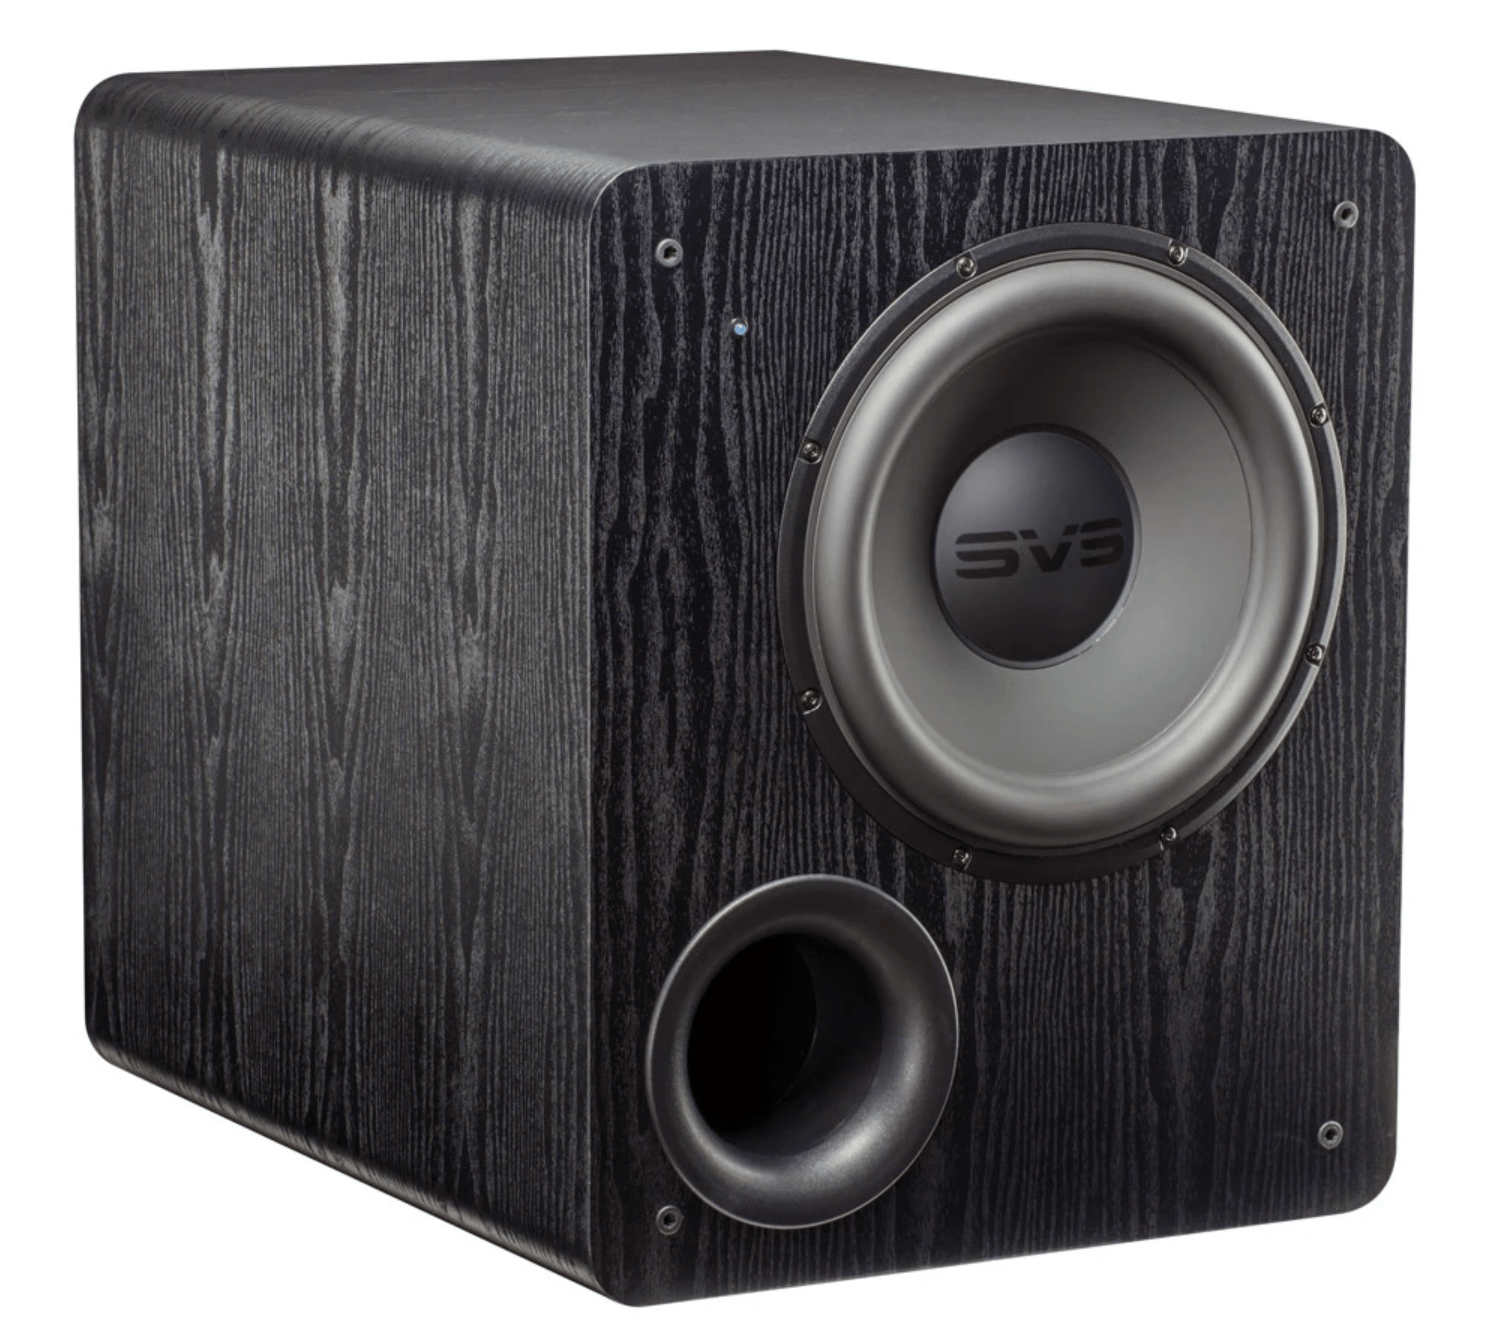 Big-time Black Friday savings on SVS Subwoofers are live now, get 'em while they last. 46a0a5ae image